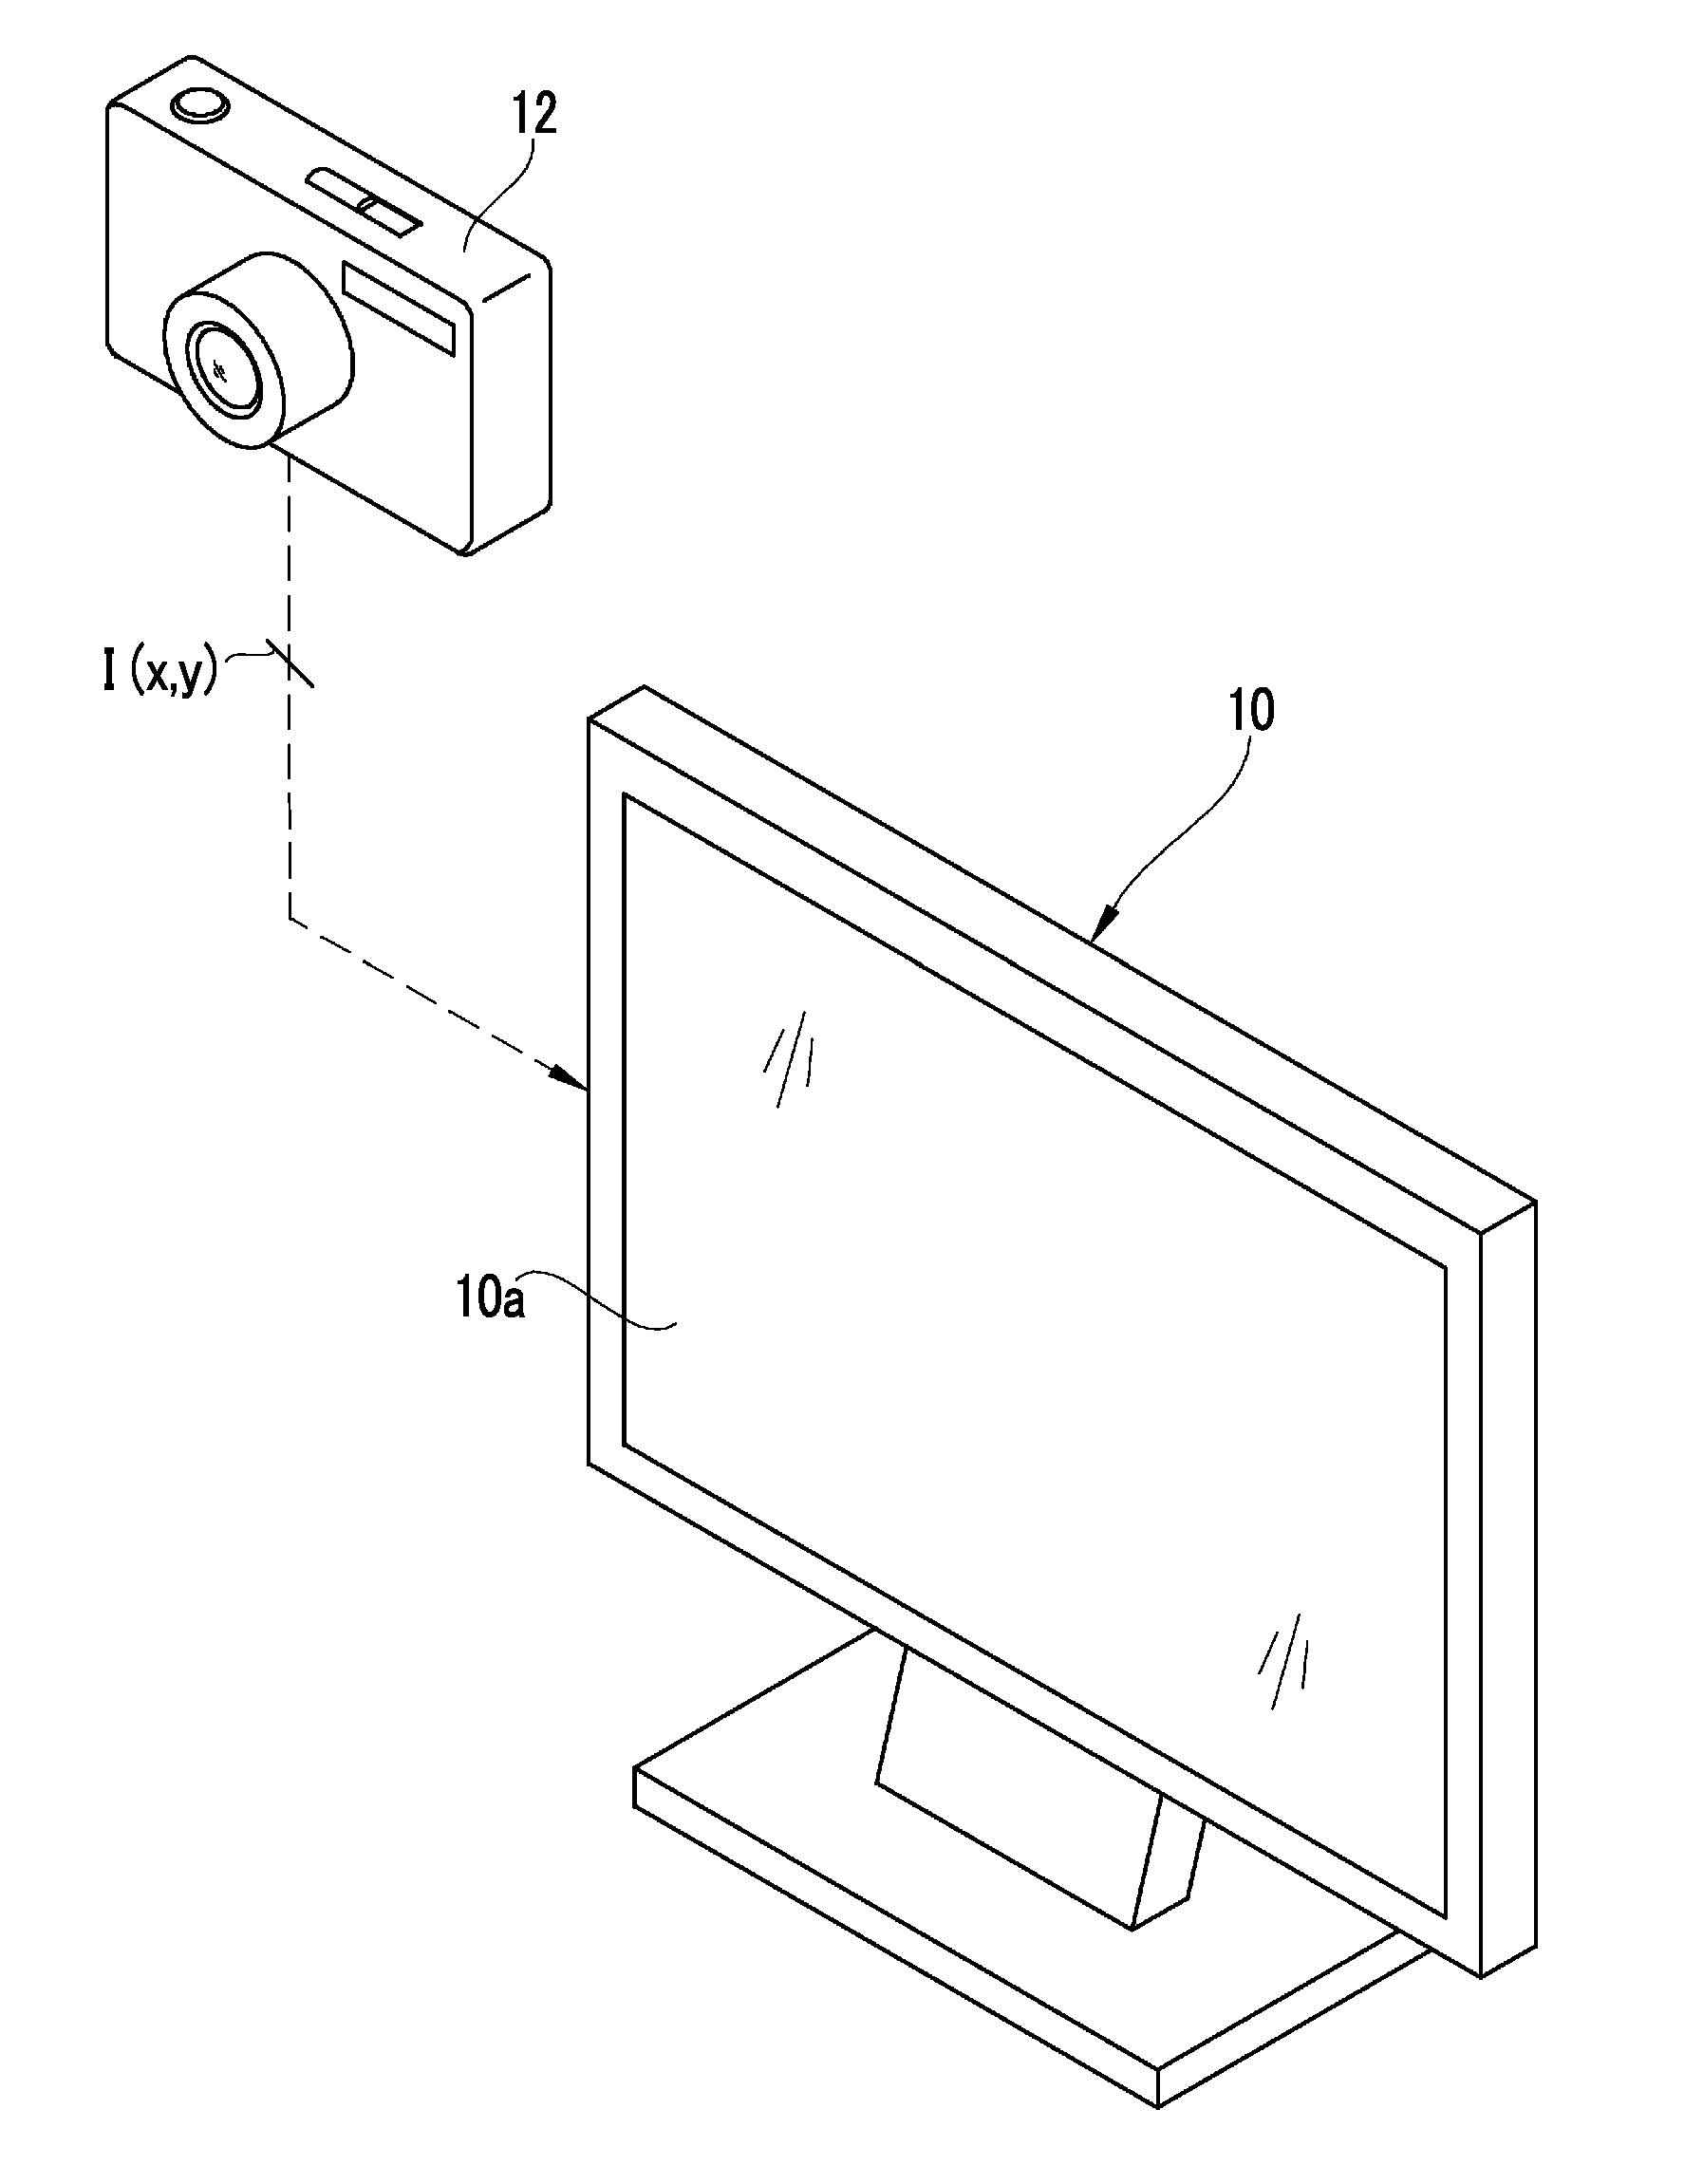 Display device and control method for same